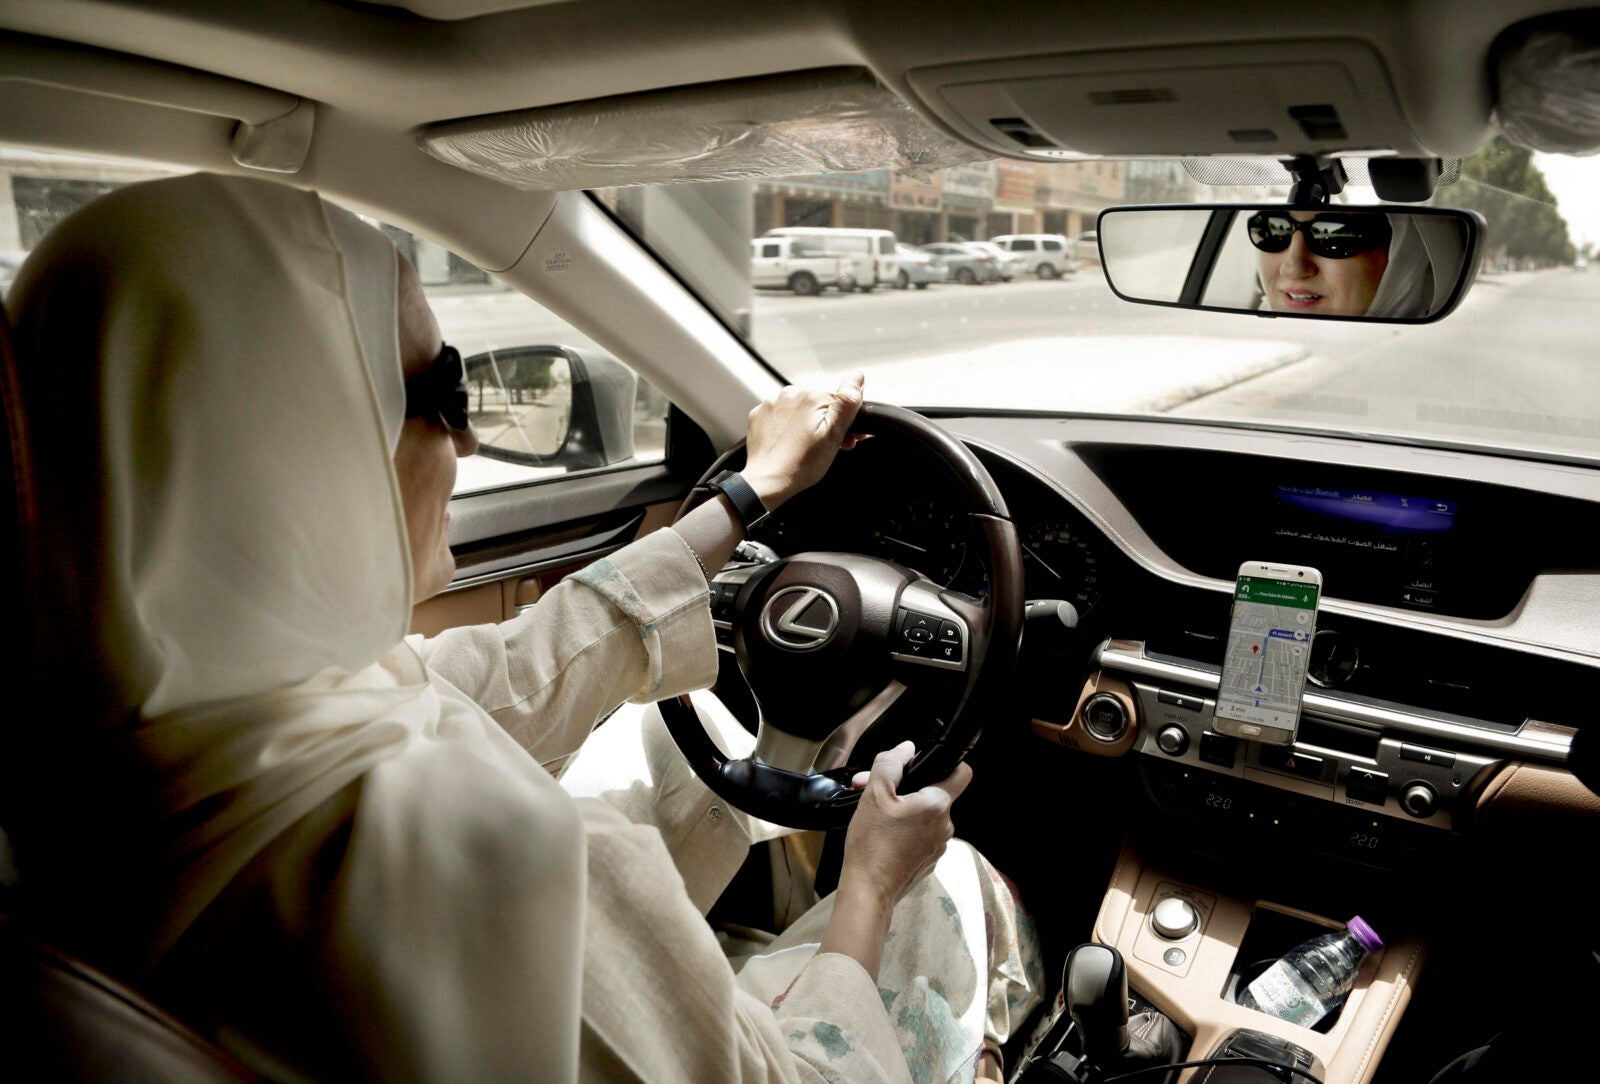 In this Sunday, June 24, 2018 photo, Ammal Farahat, who has signed up to be a driver for Careem, a regional ride-hailing service that is a competitor to Uber, drives her car in Riyadh, Saudi Arabia. After lifting a longstanding ban on women driving, it's the latest job opening for Saudi women, that had been reserved for men only, and one that sharply challenges traditional norms. (AP Photo/Nariman El-Mofty)